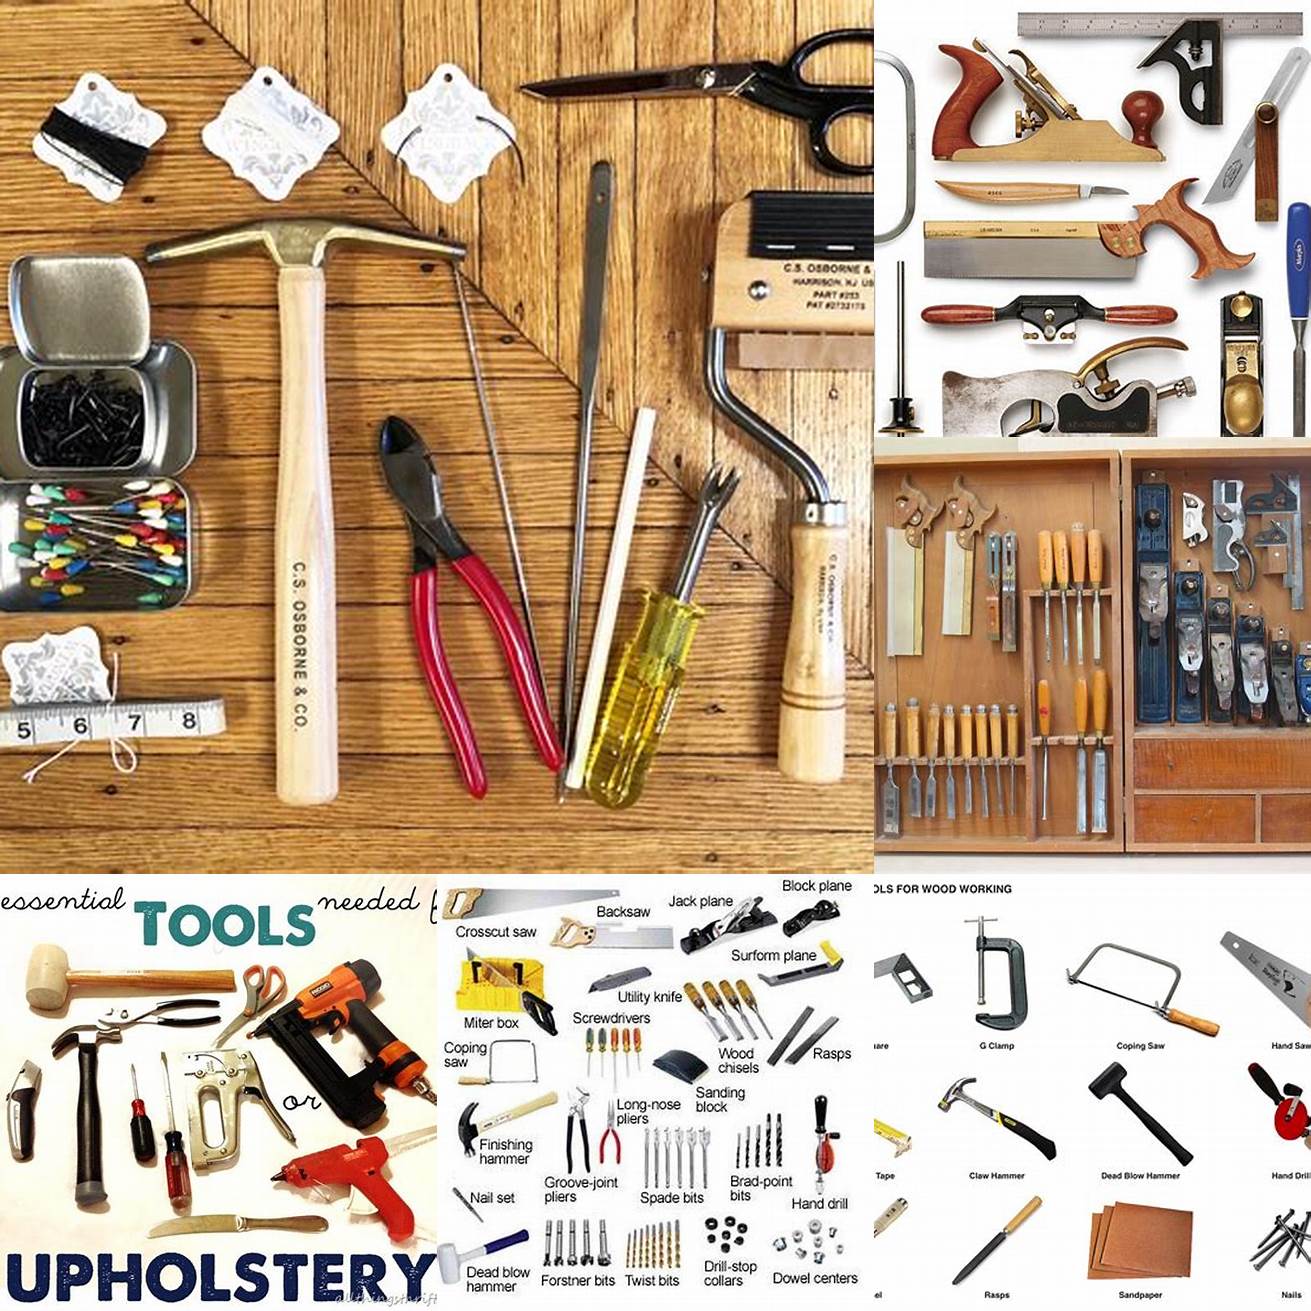 A picture of the tools needed